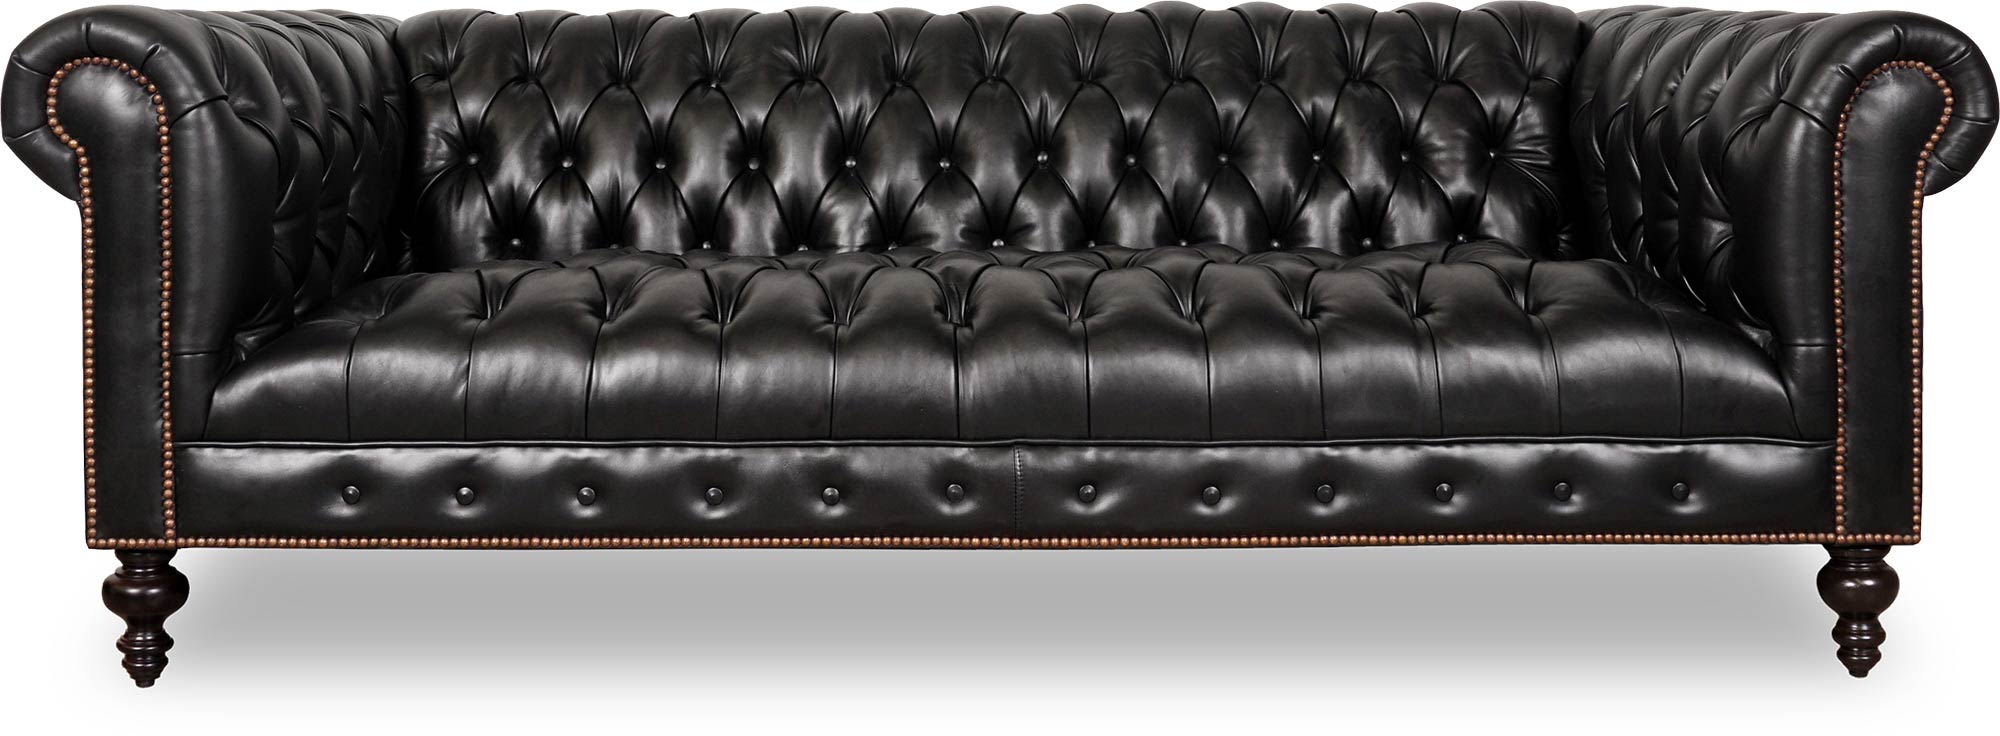 Chesterfield Sofas Armchairs, How To Spot A Real Chesterfield Sofa